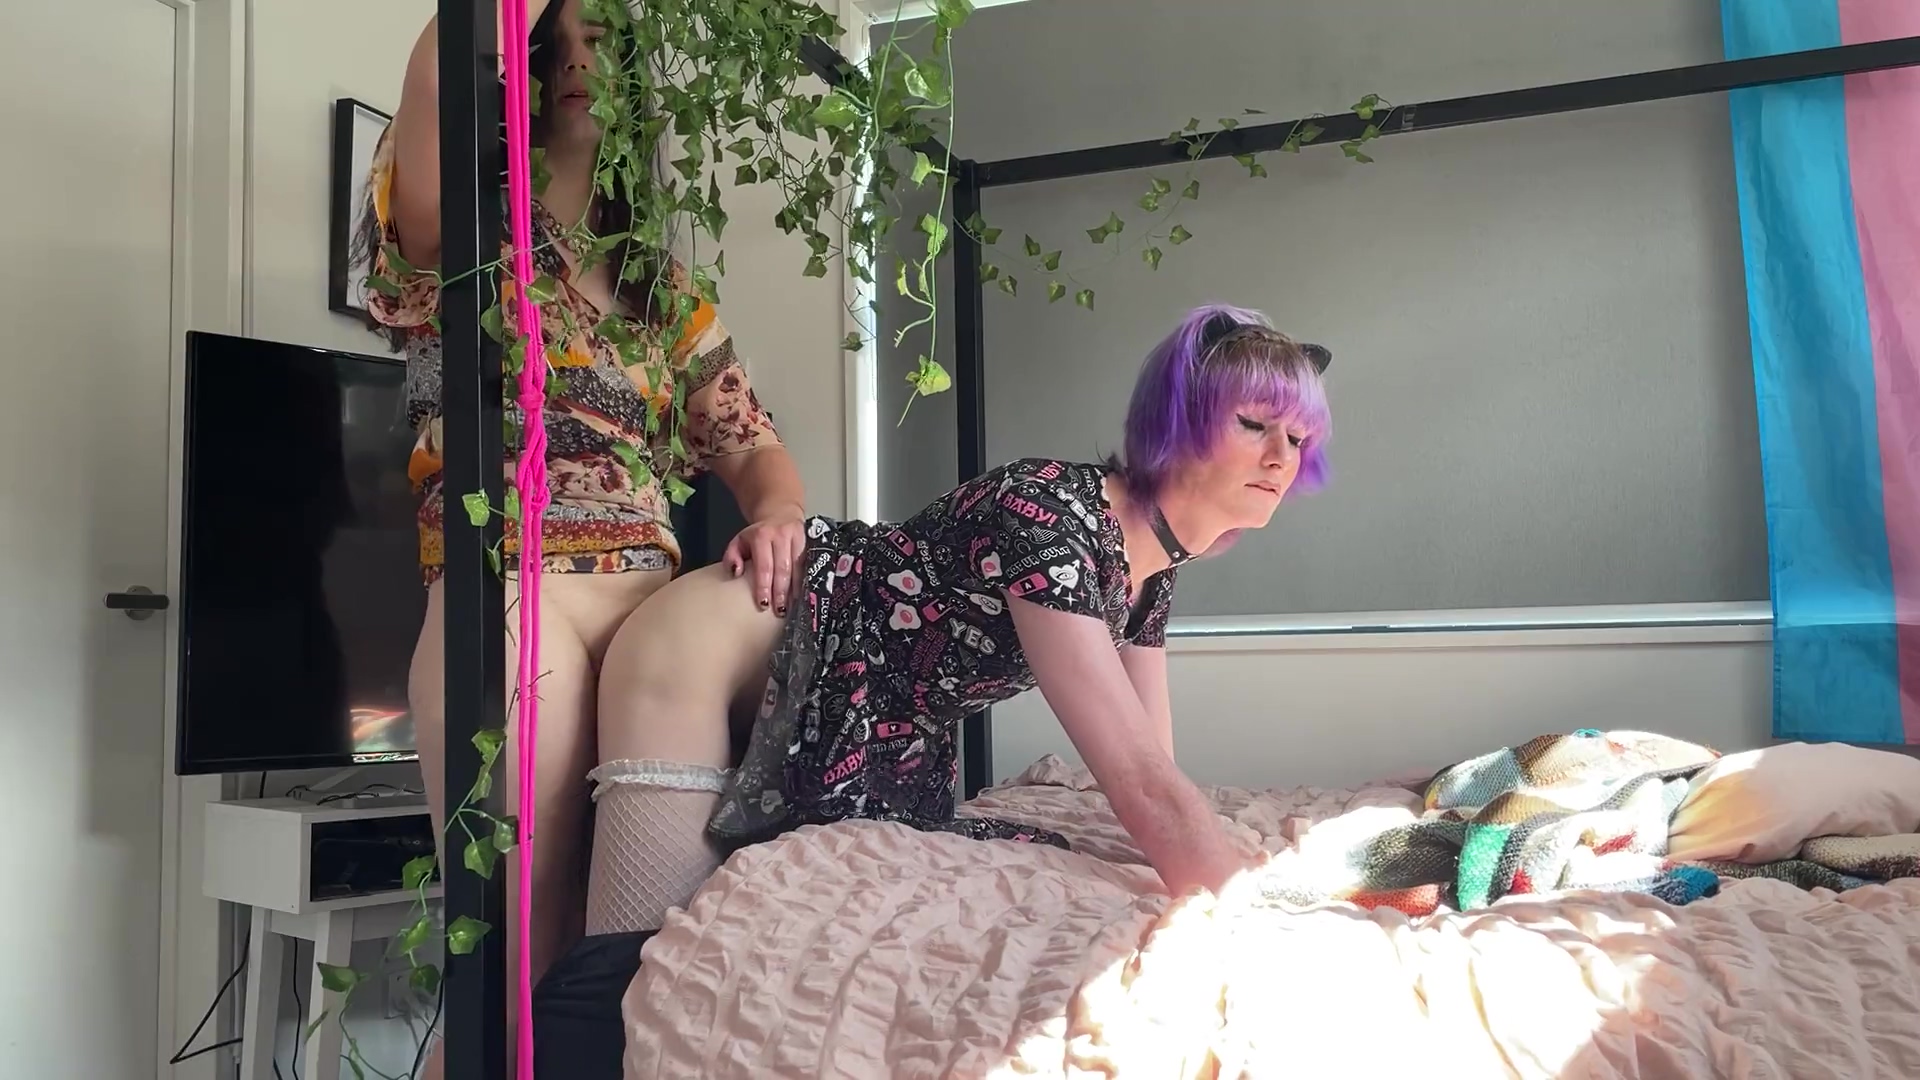 New Zealand Amateur Trans Lesbian Anal Ass Fucking Cassie Moans Shemale Porn Video - Shemale and Tranny Porn Tube pic